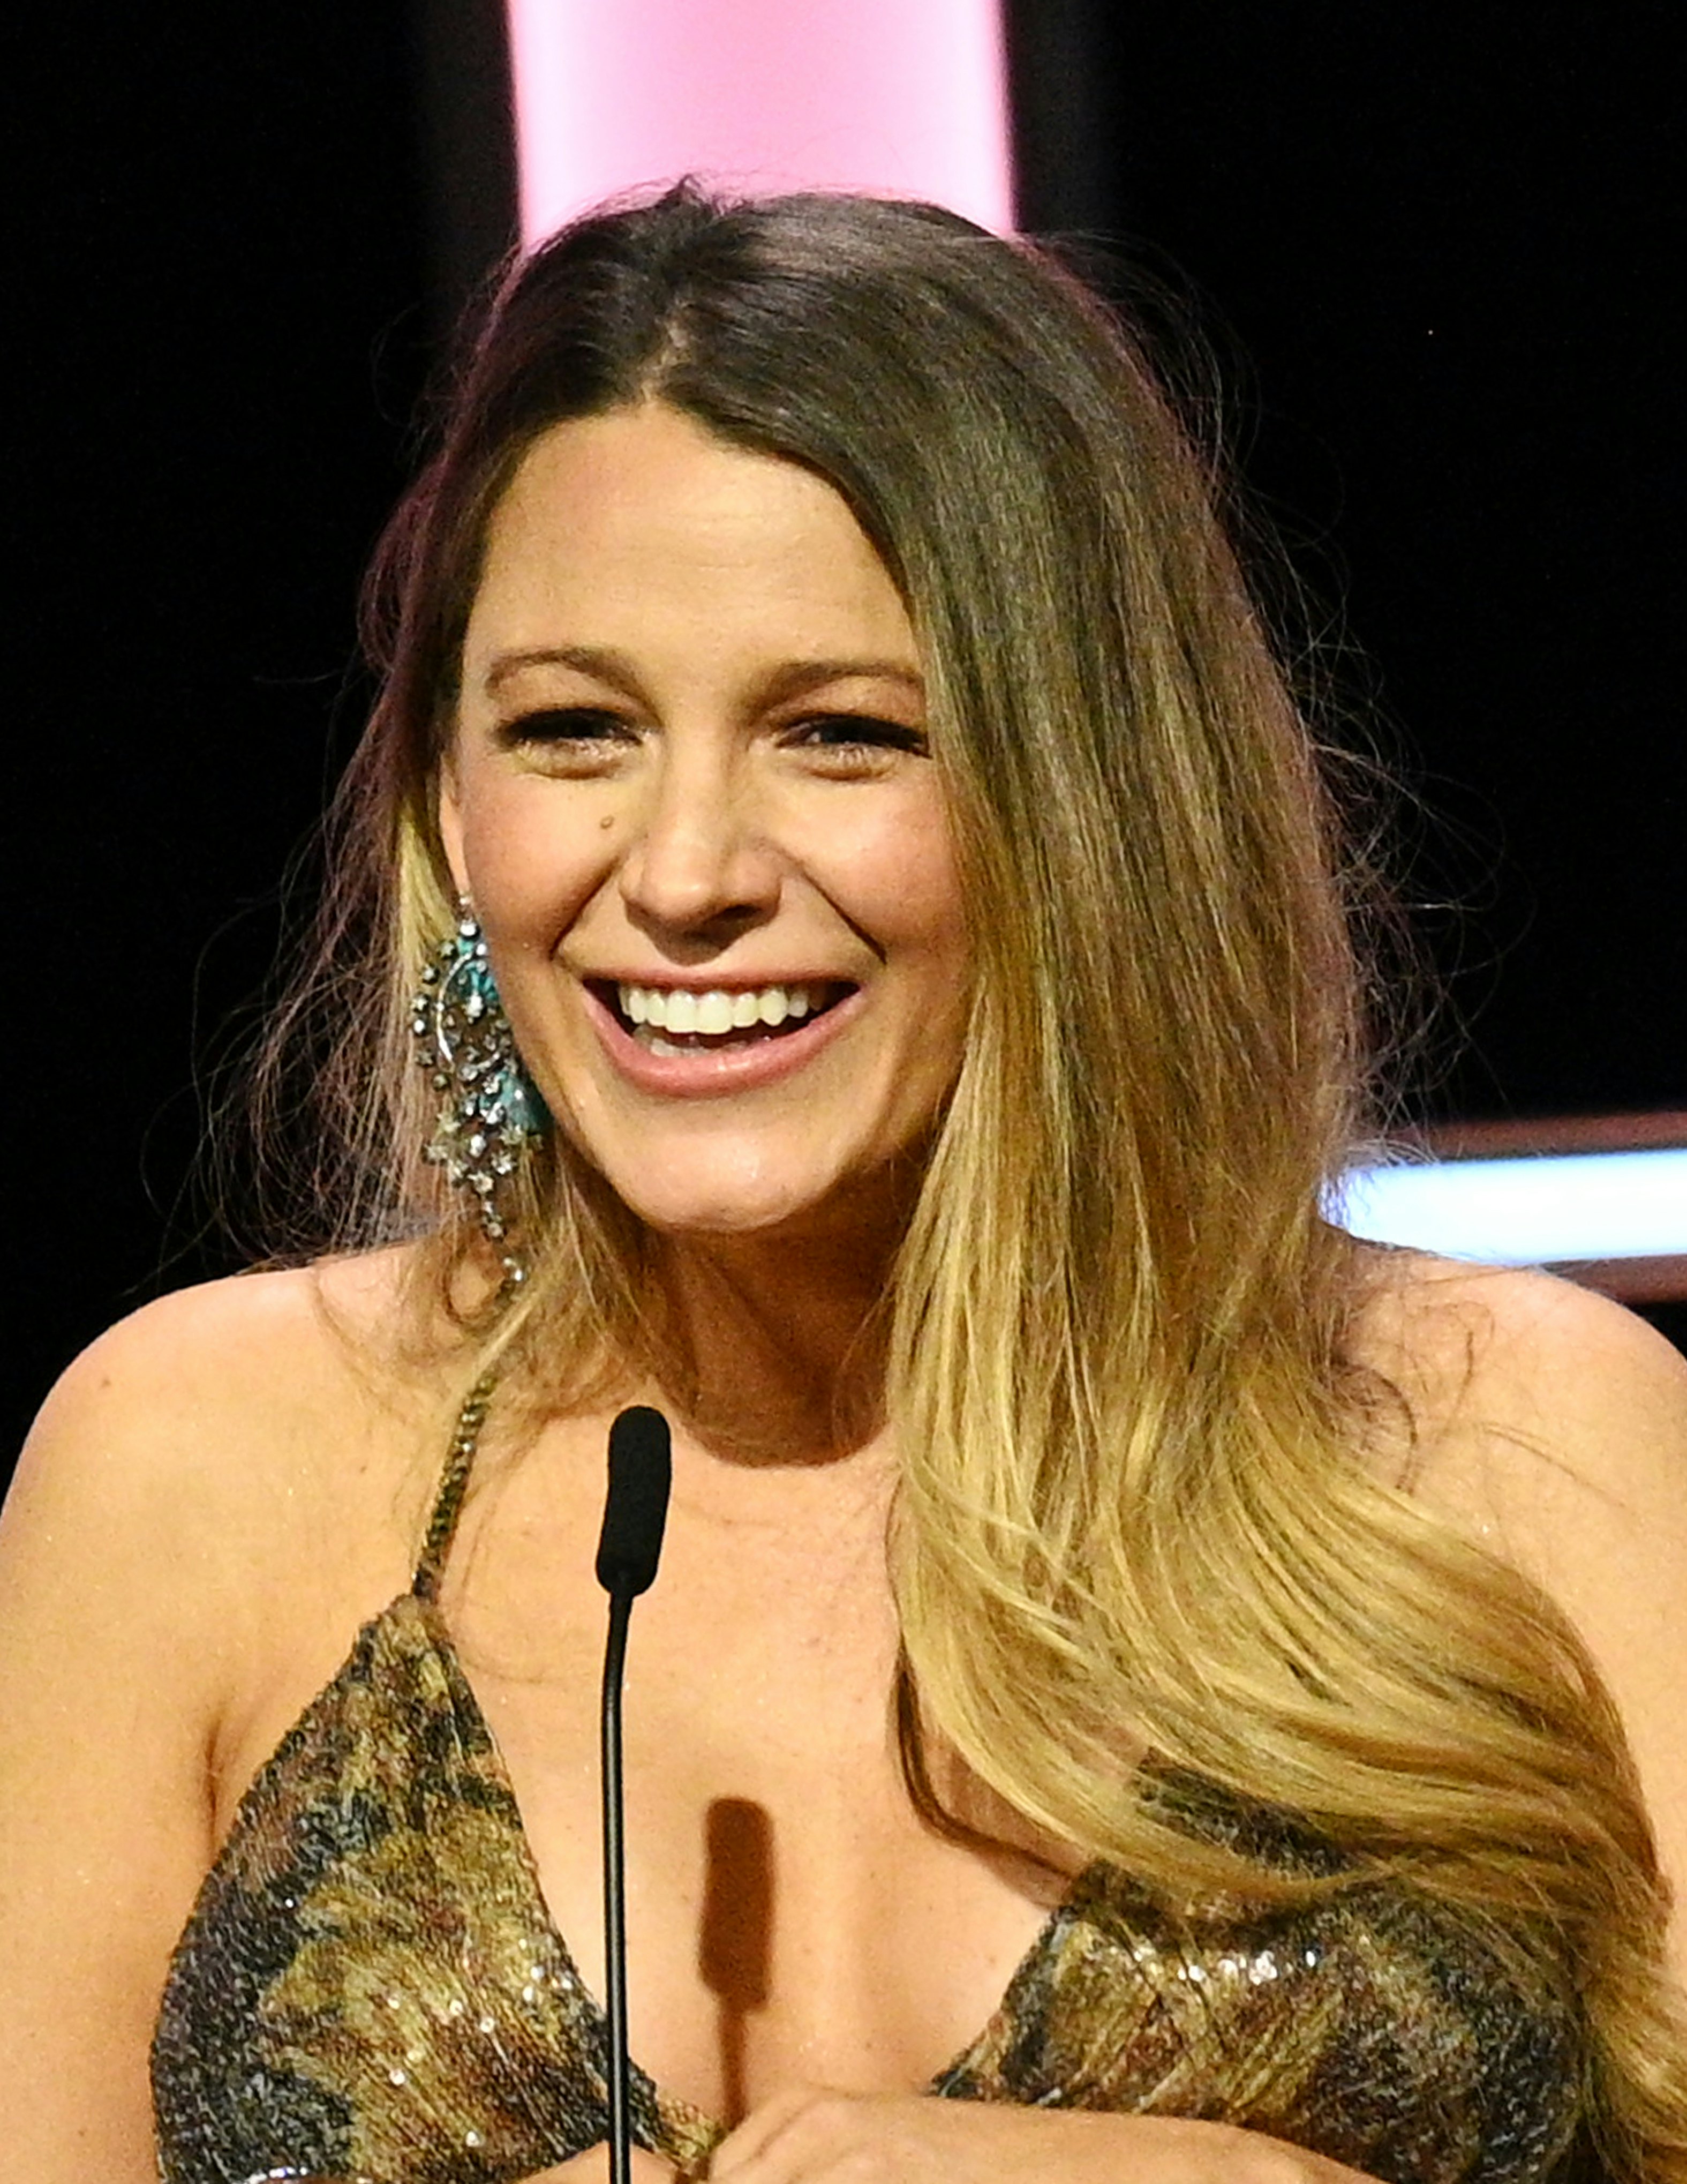 Blake Lively Trolls Ryan Reynolds Over Her Messy Hair In Funny New Photo pic